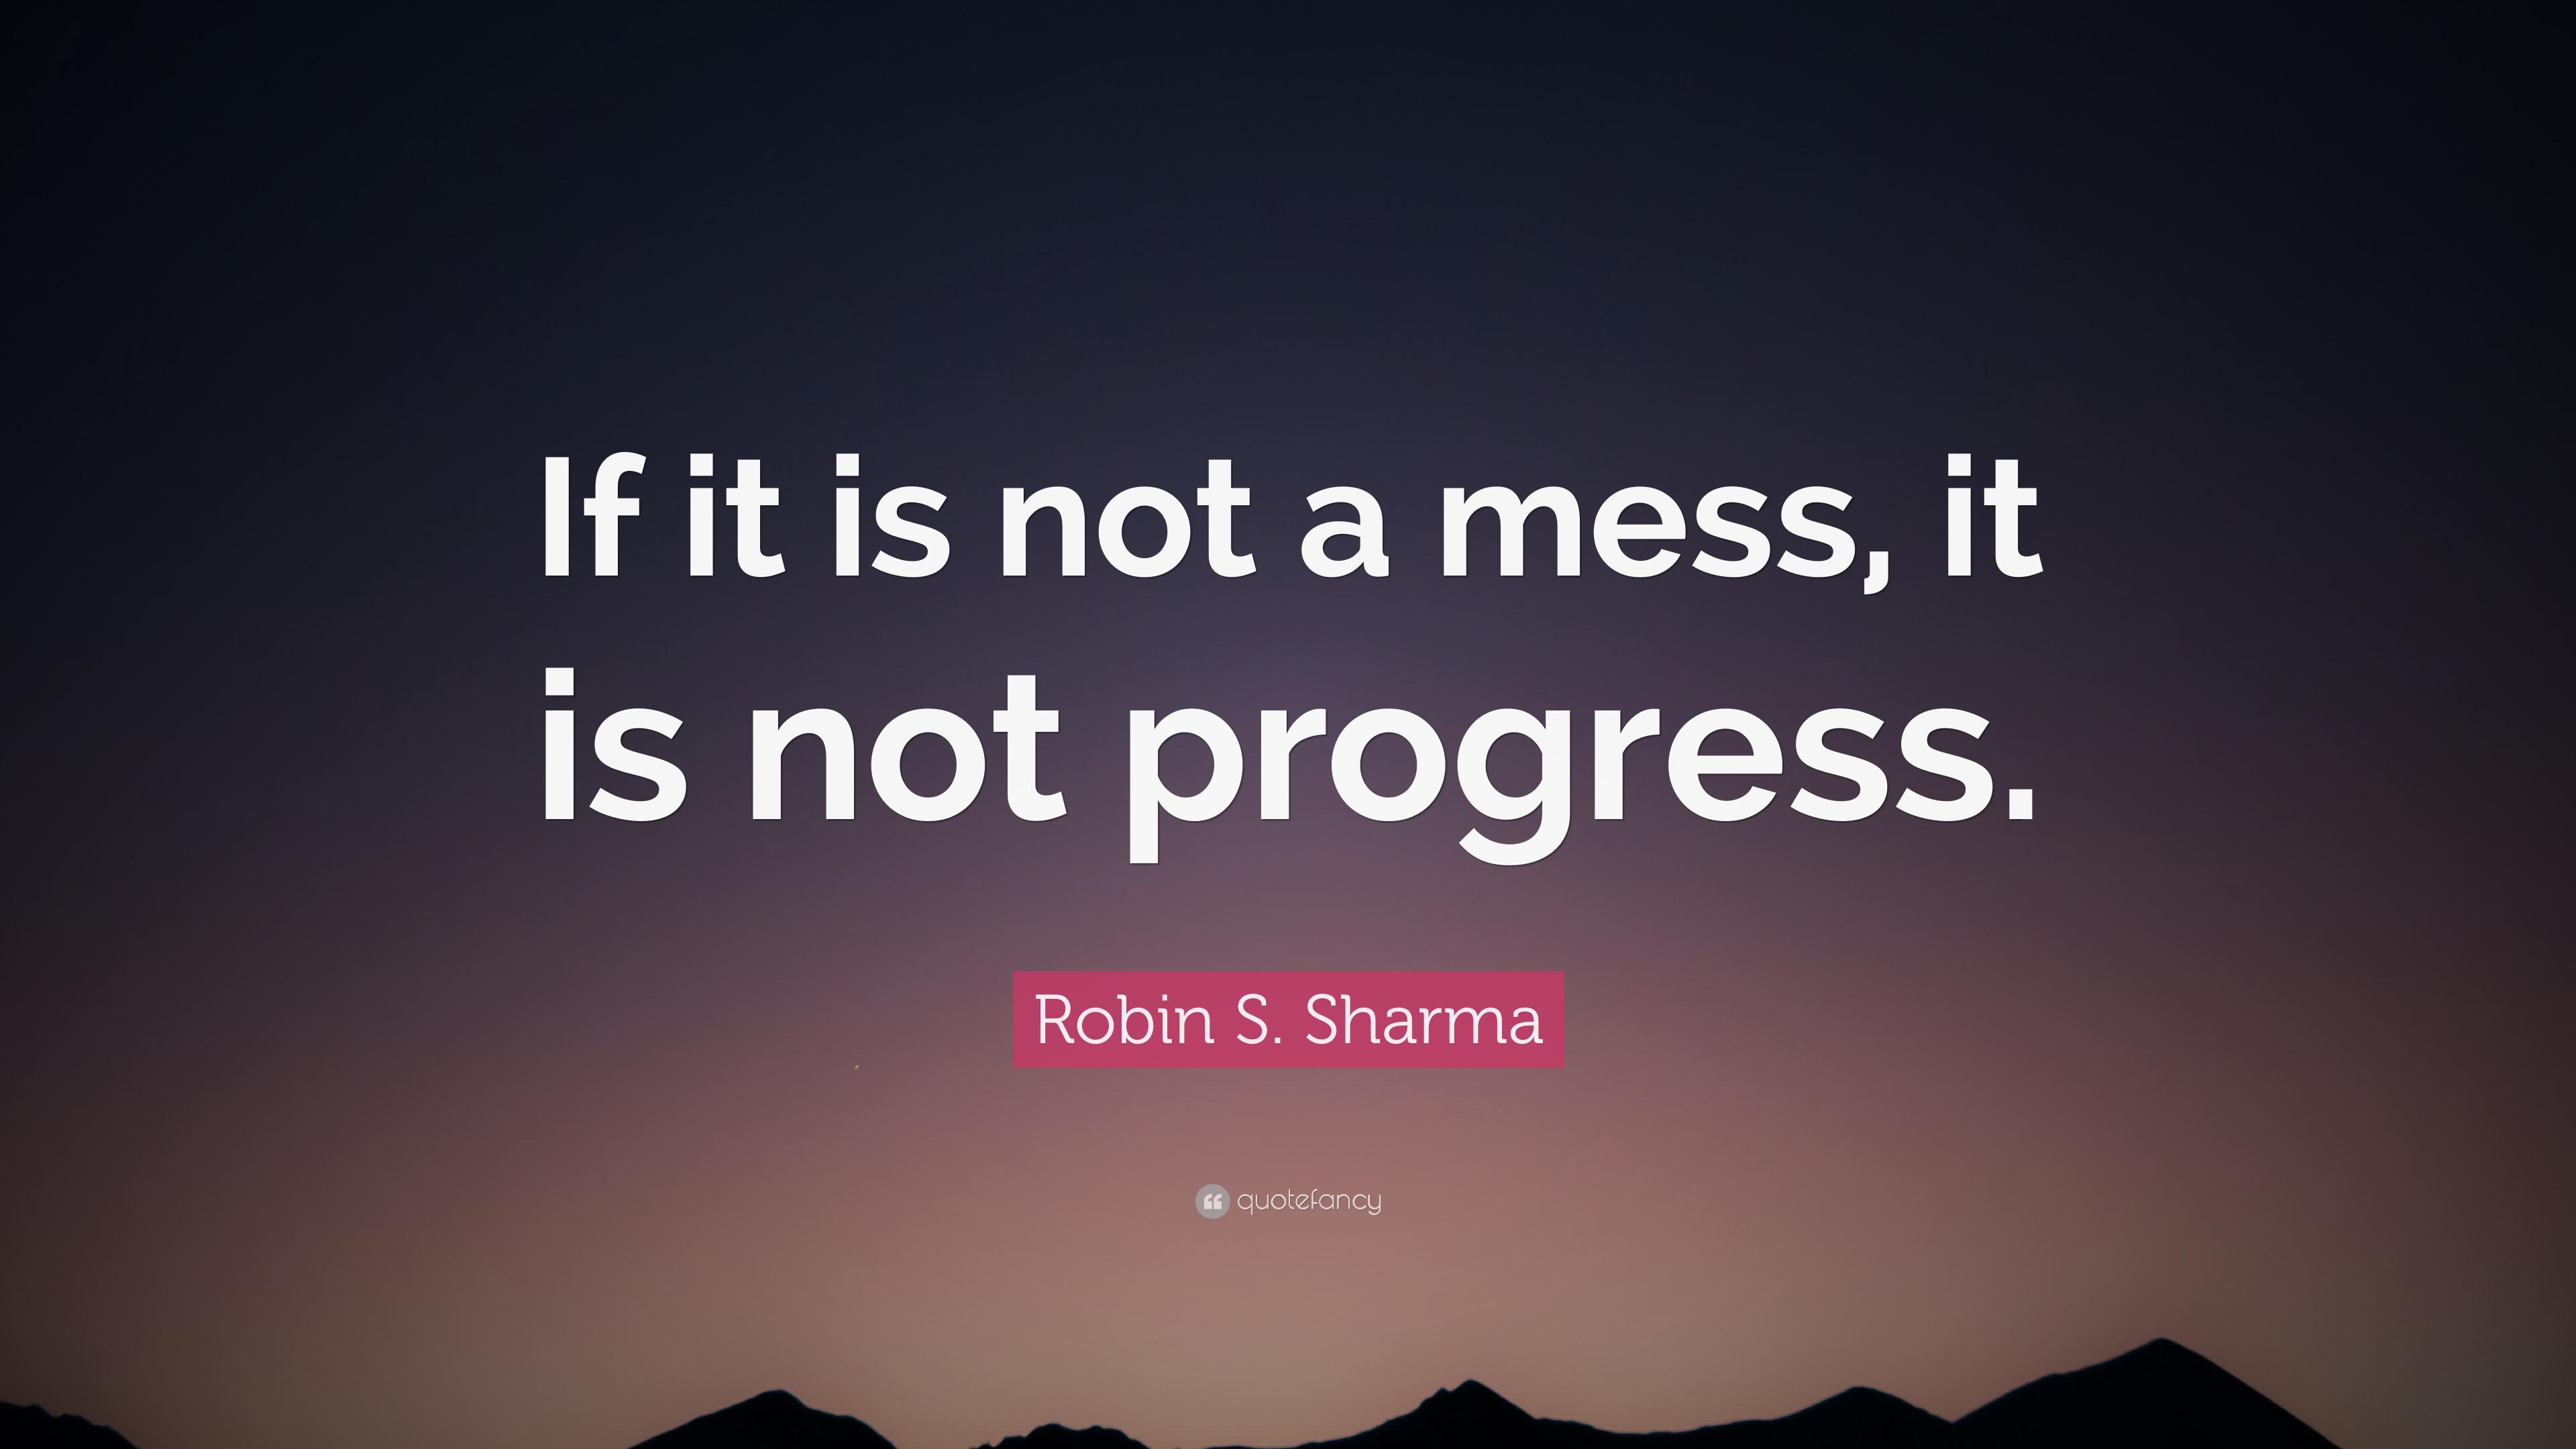 Robin S. Sharma Quote: “If it is not a mess, it is not progress